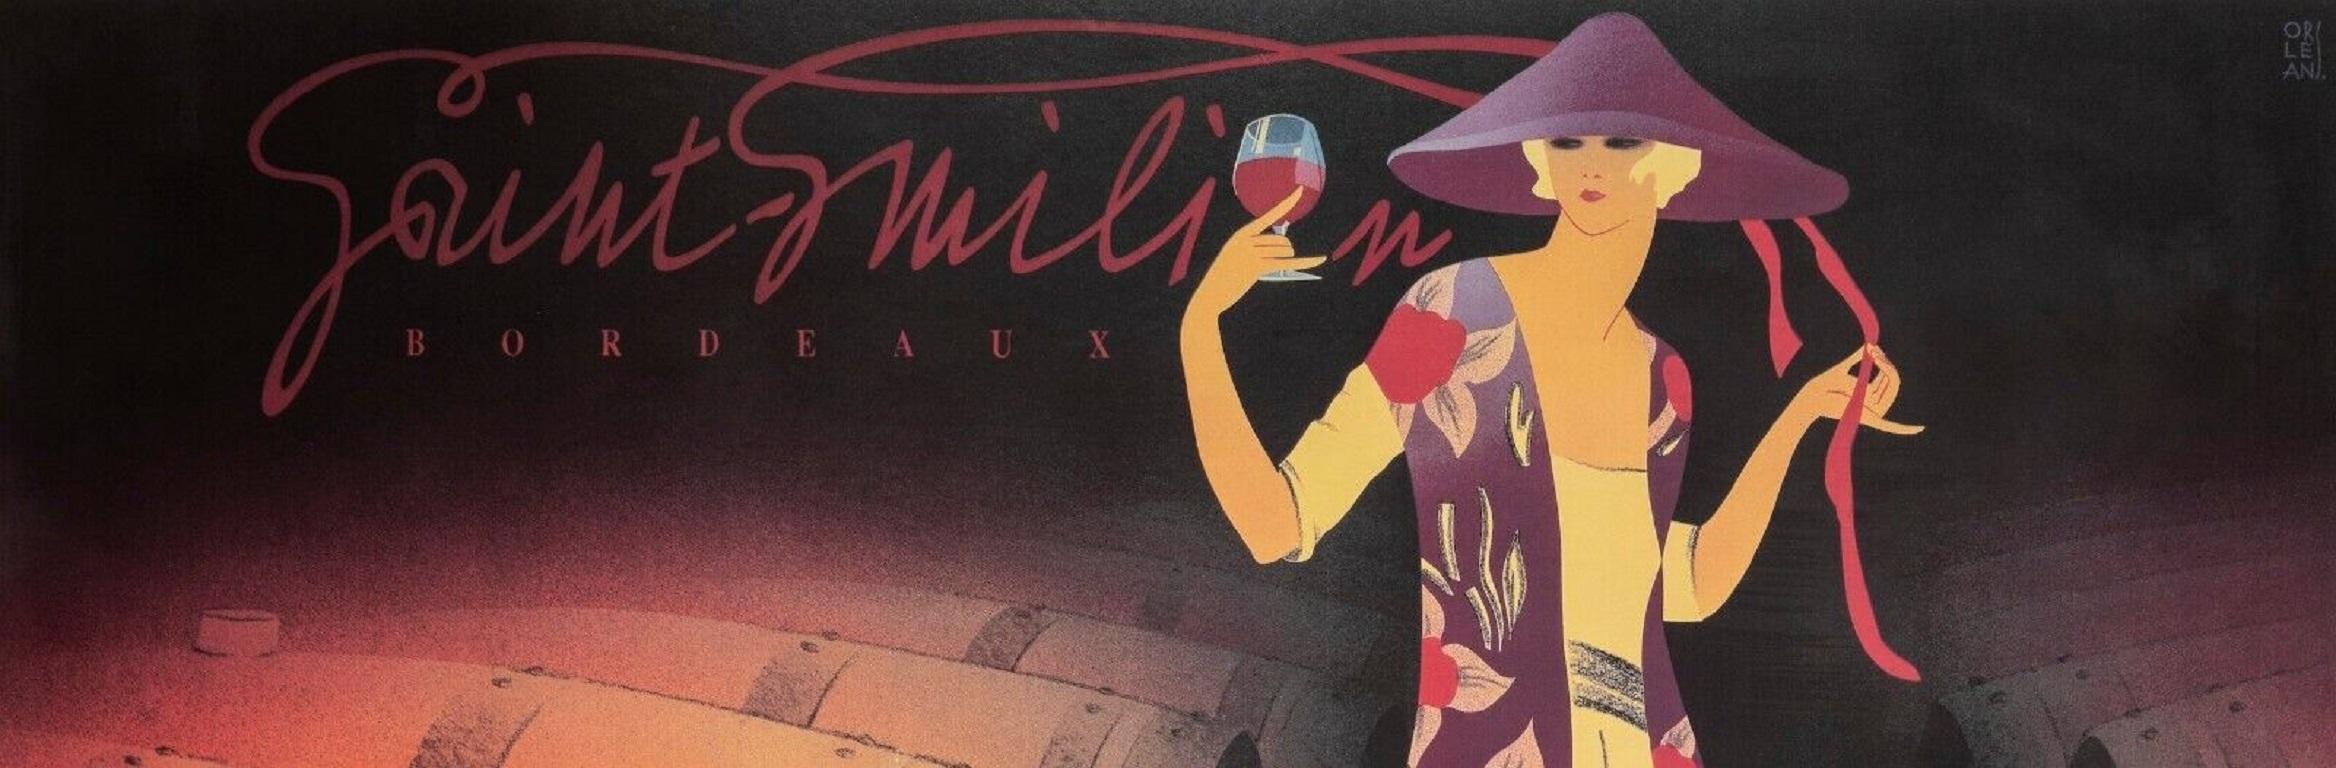 Original Poster-Philippe Sommer-Saint Emilion-Chateau Lapeyre-Wine, 1995

Poster to promote the french wine St Emilion – Chateau Lapeyre.
This poster of Château Lapeyre by Philippe Sommer shows us an Asian-style lady, about to taste a glass of red